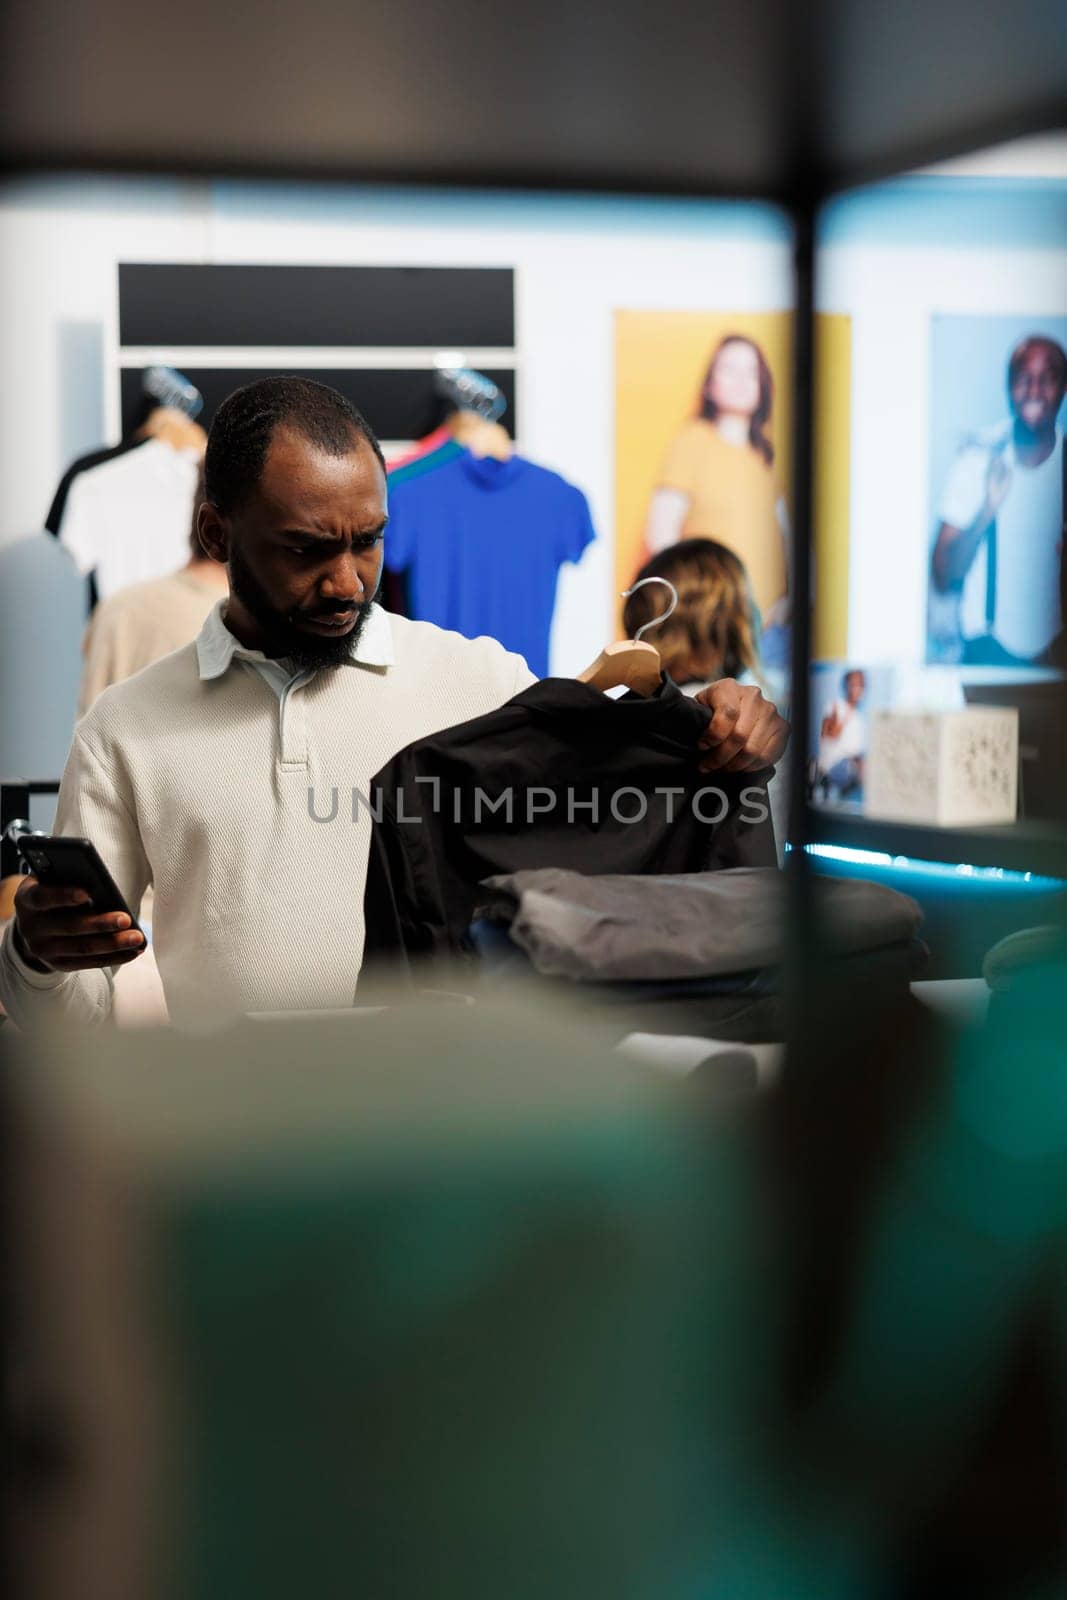 Man shopping for shirt and checking app by DCStudio